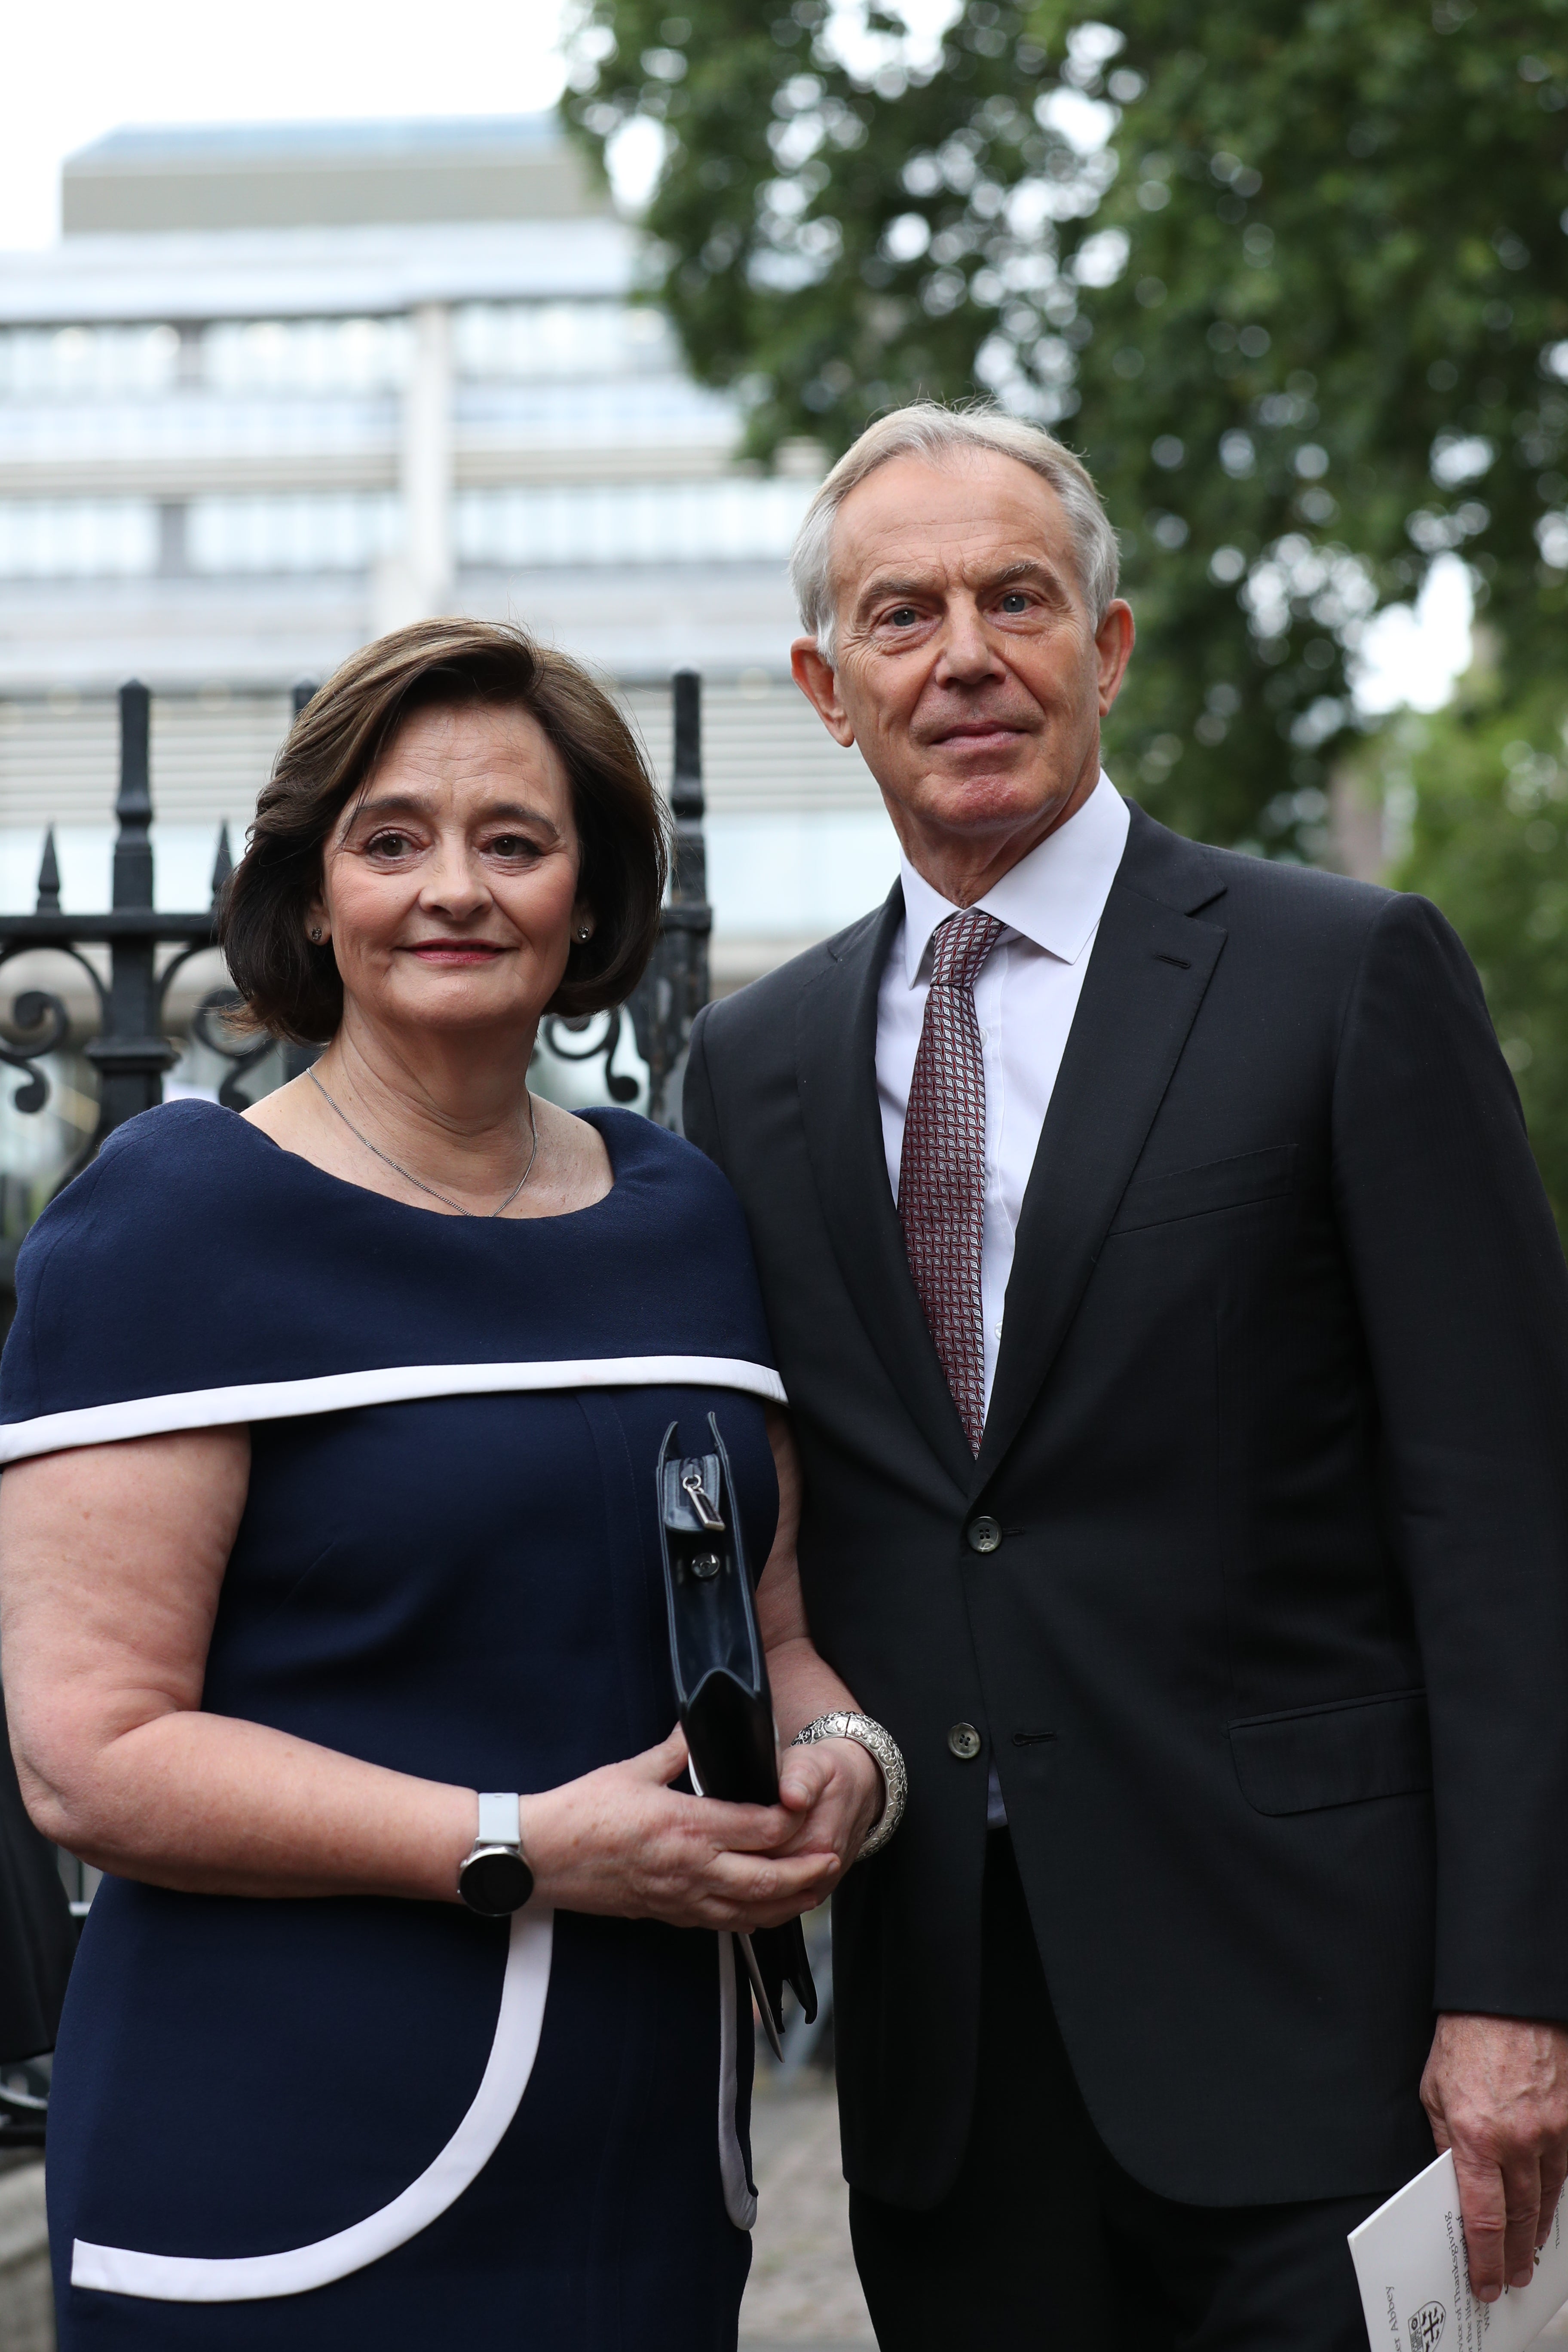 Former prime minister Tony Blair and his wife Cherie have defended their purchase